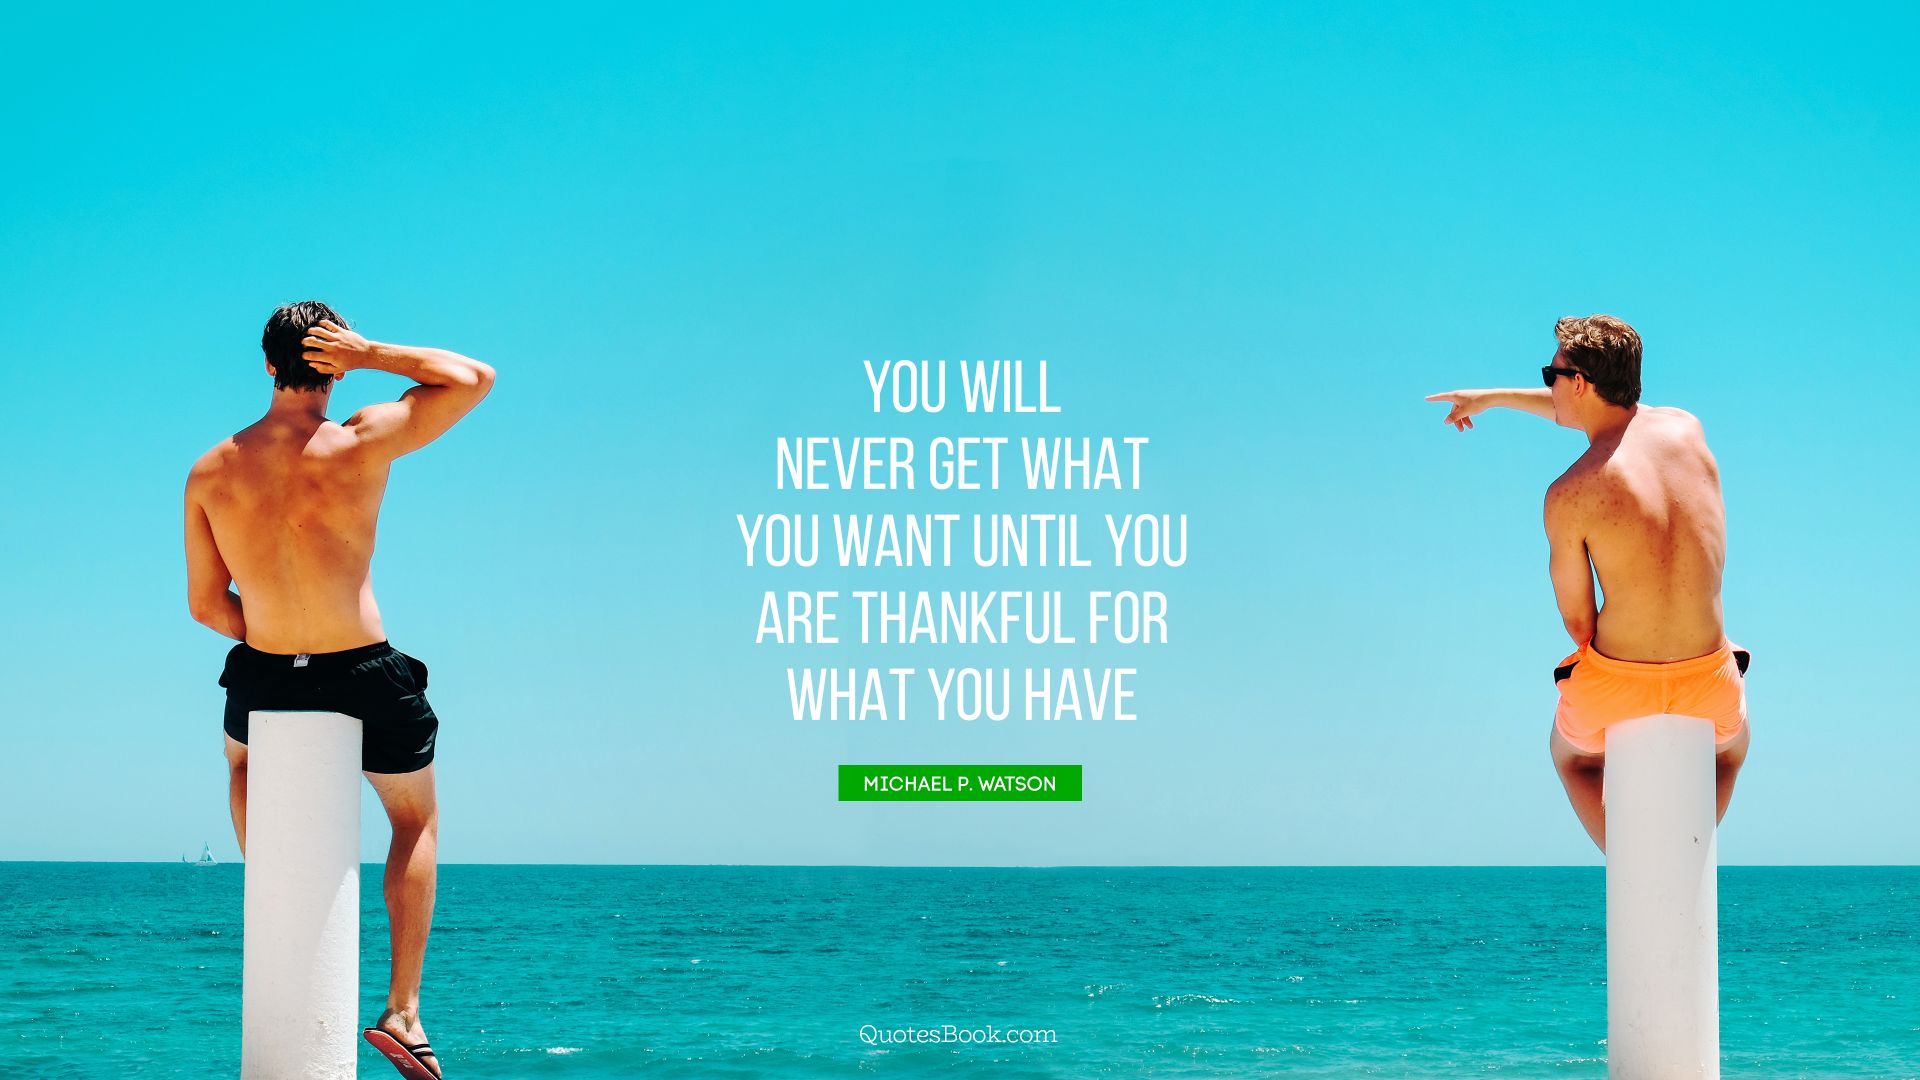 You will never get what you want until you are thankful for what you have. - Quote by Michael P. Watson